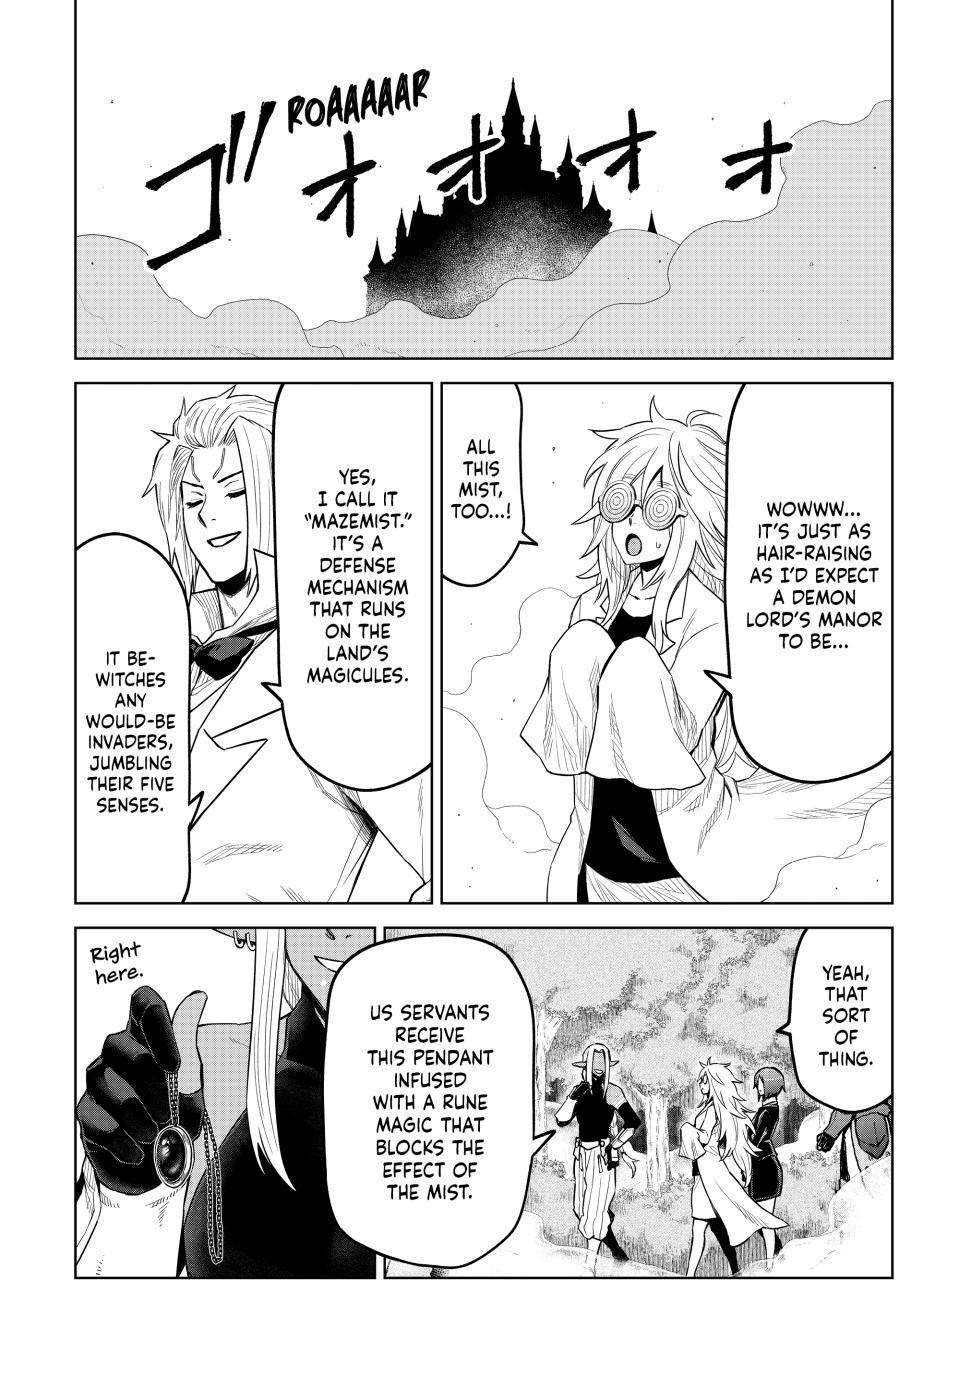 That Time I Got Reincarnated as a Slime - Clayman - chapter 23 - #4